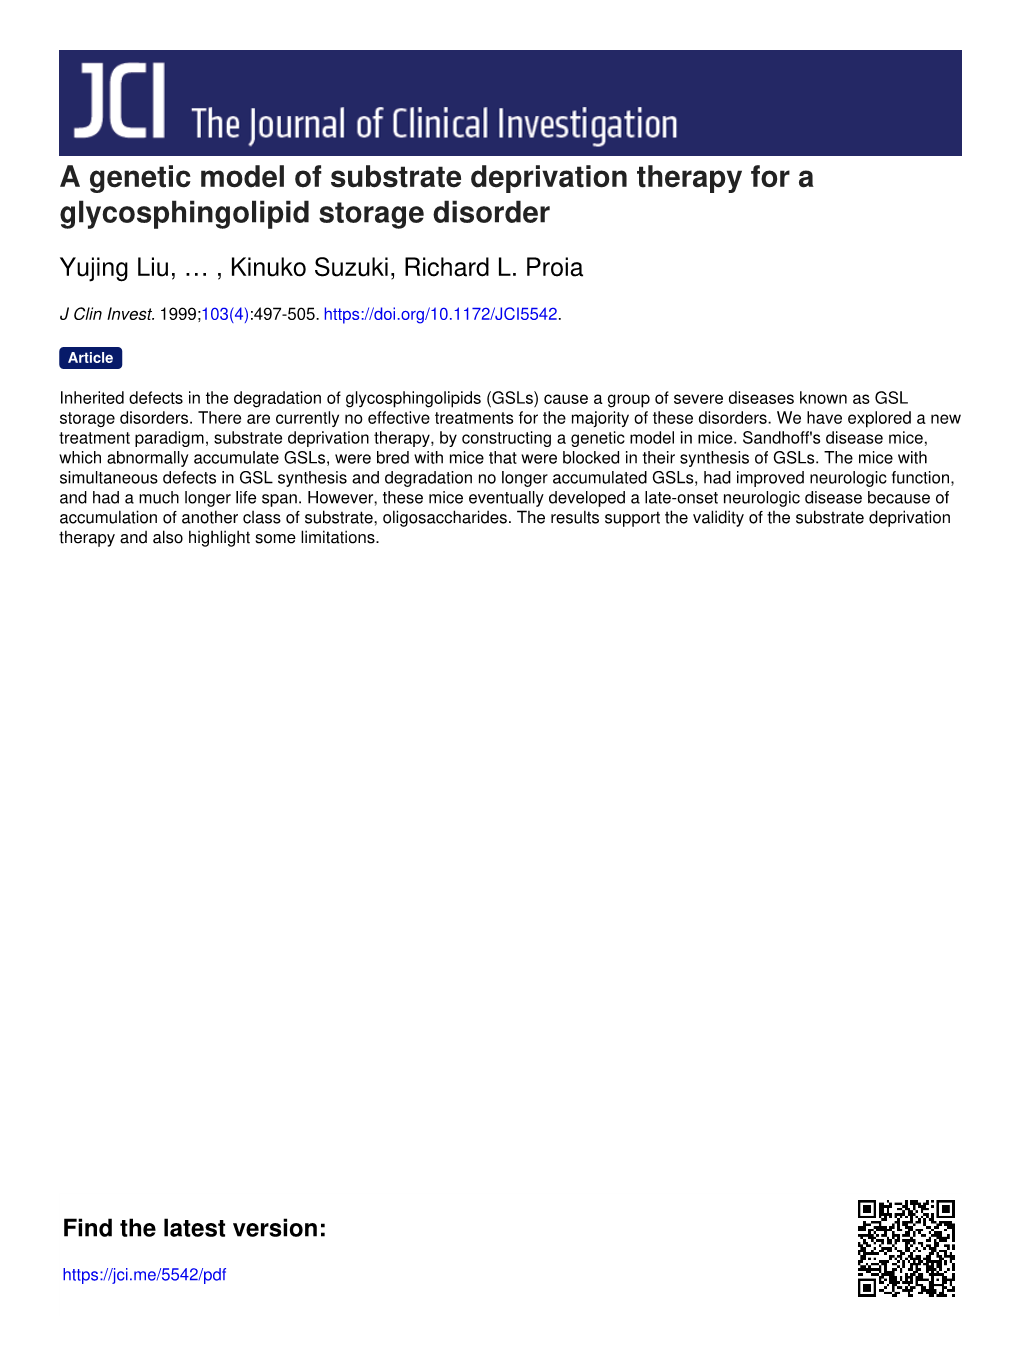 A Genetic Model of Substrate Deprivation Therapy for a Glycosphingolipid Storage Disorder